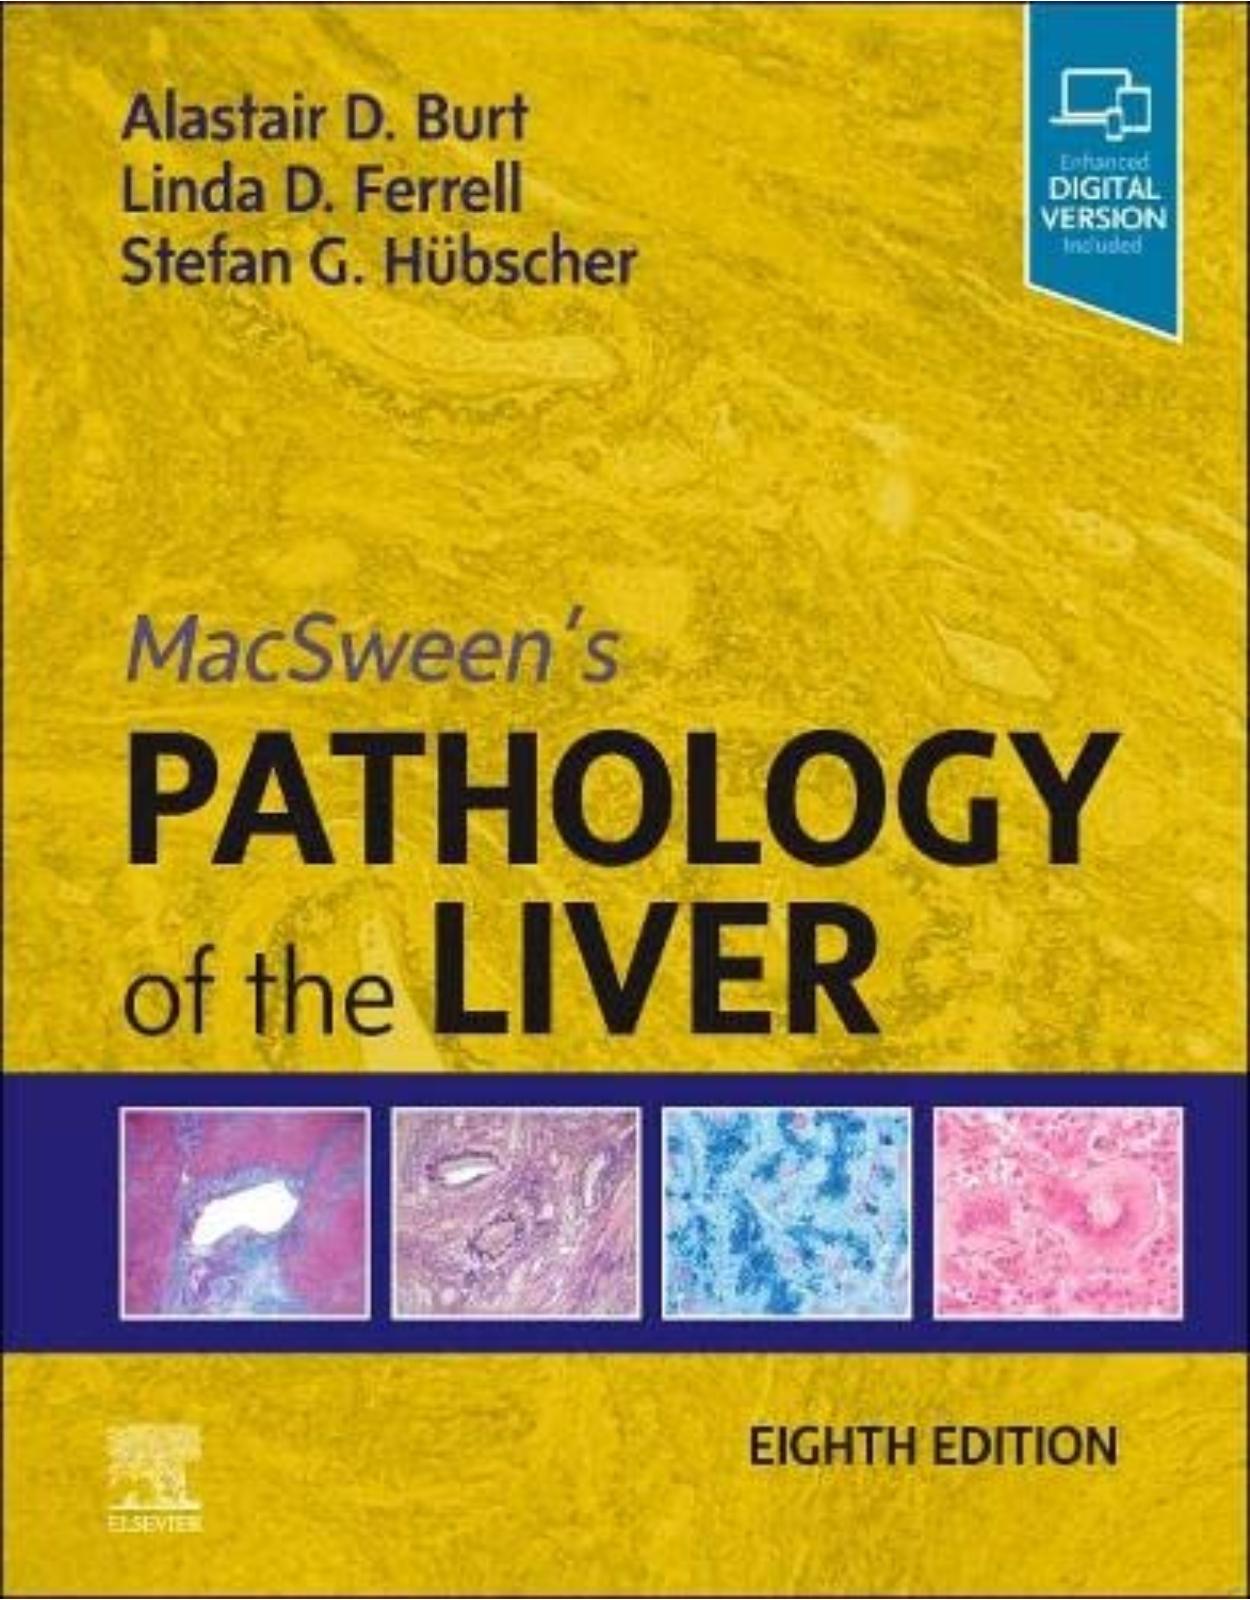 MacSween’s Pathology of the Liver 